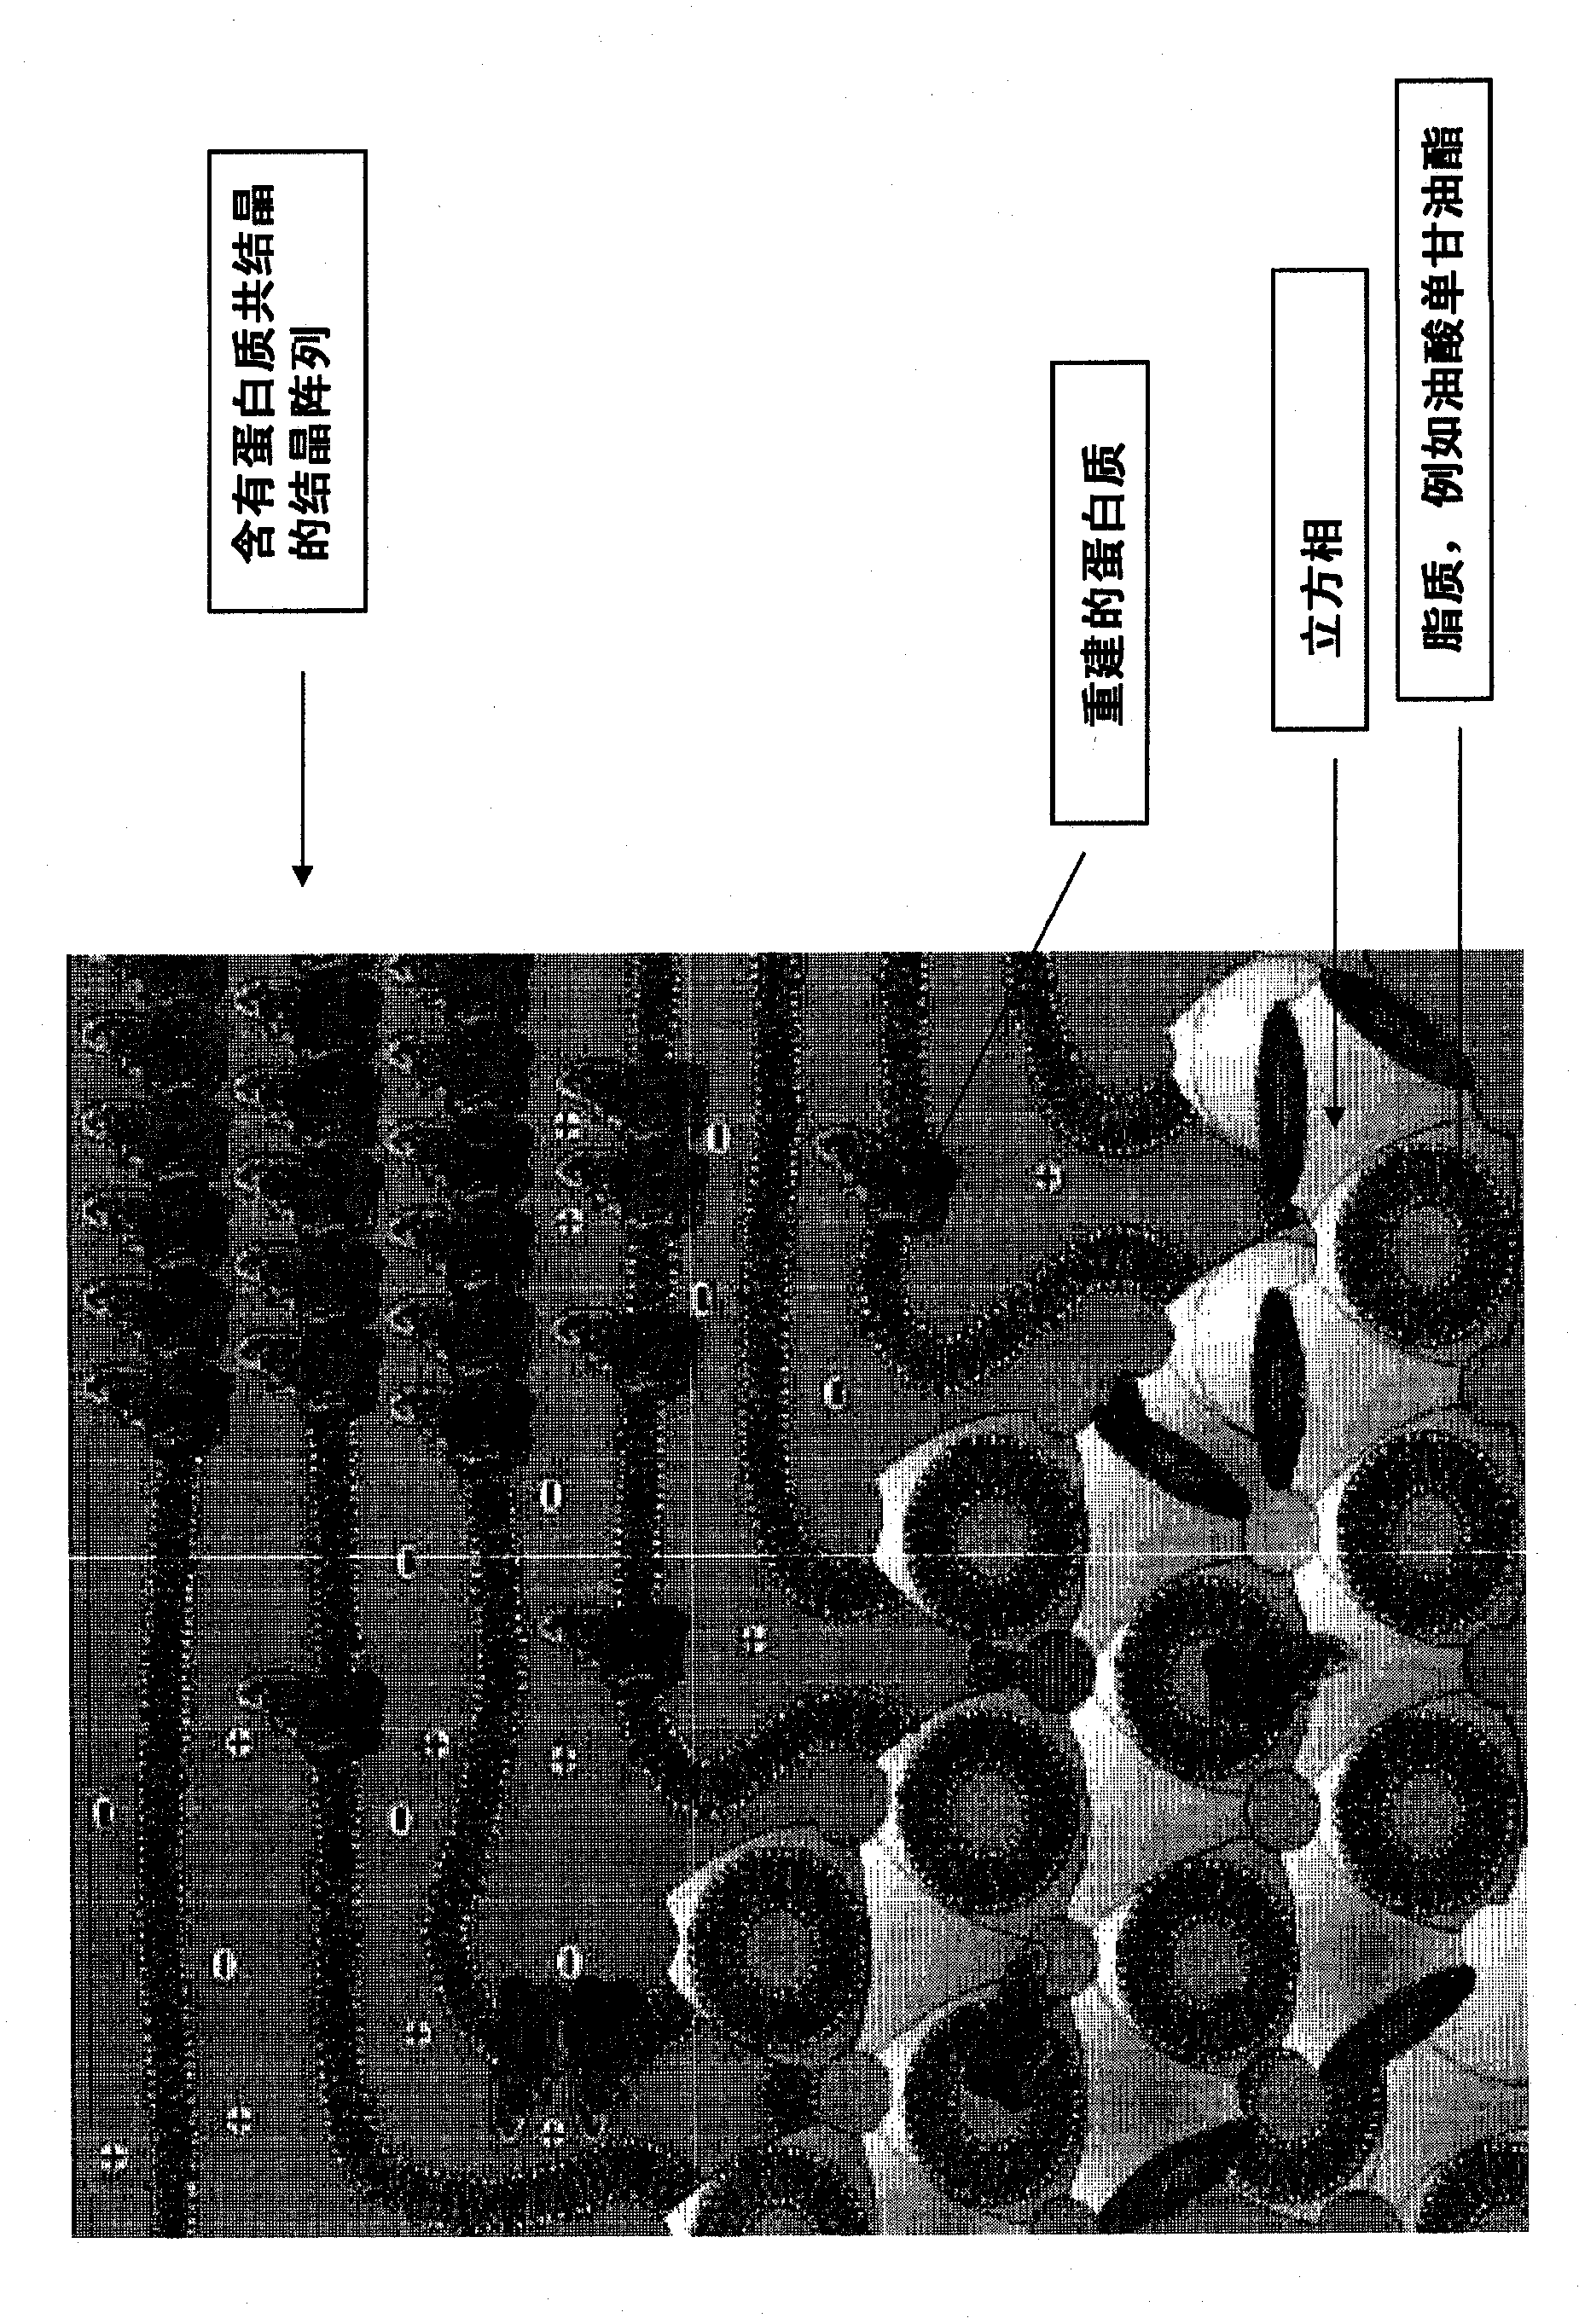 Method of loading a crystallization device